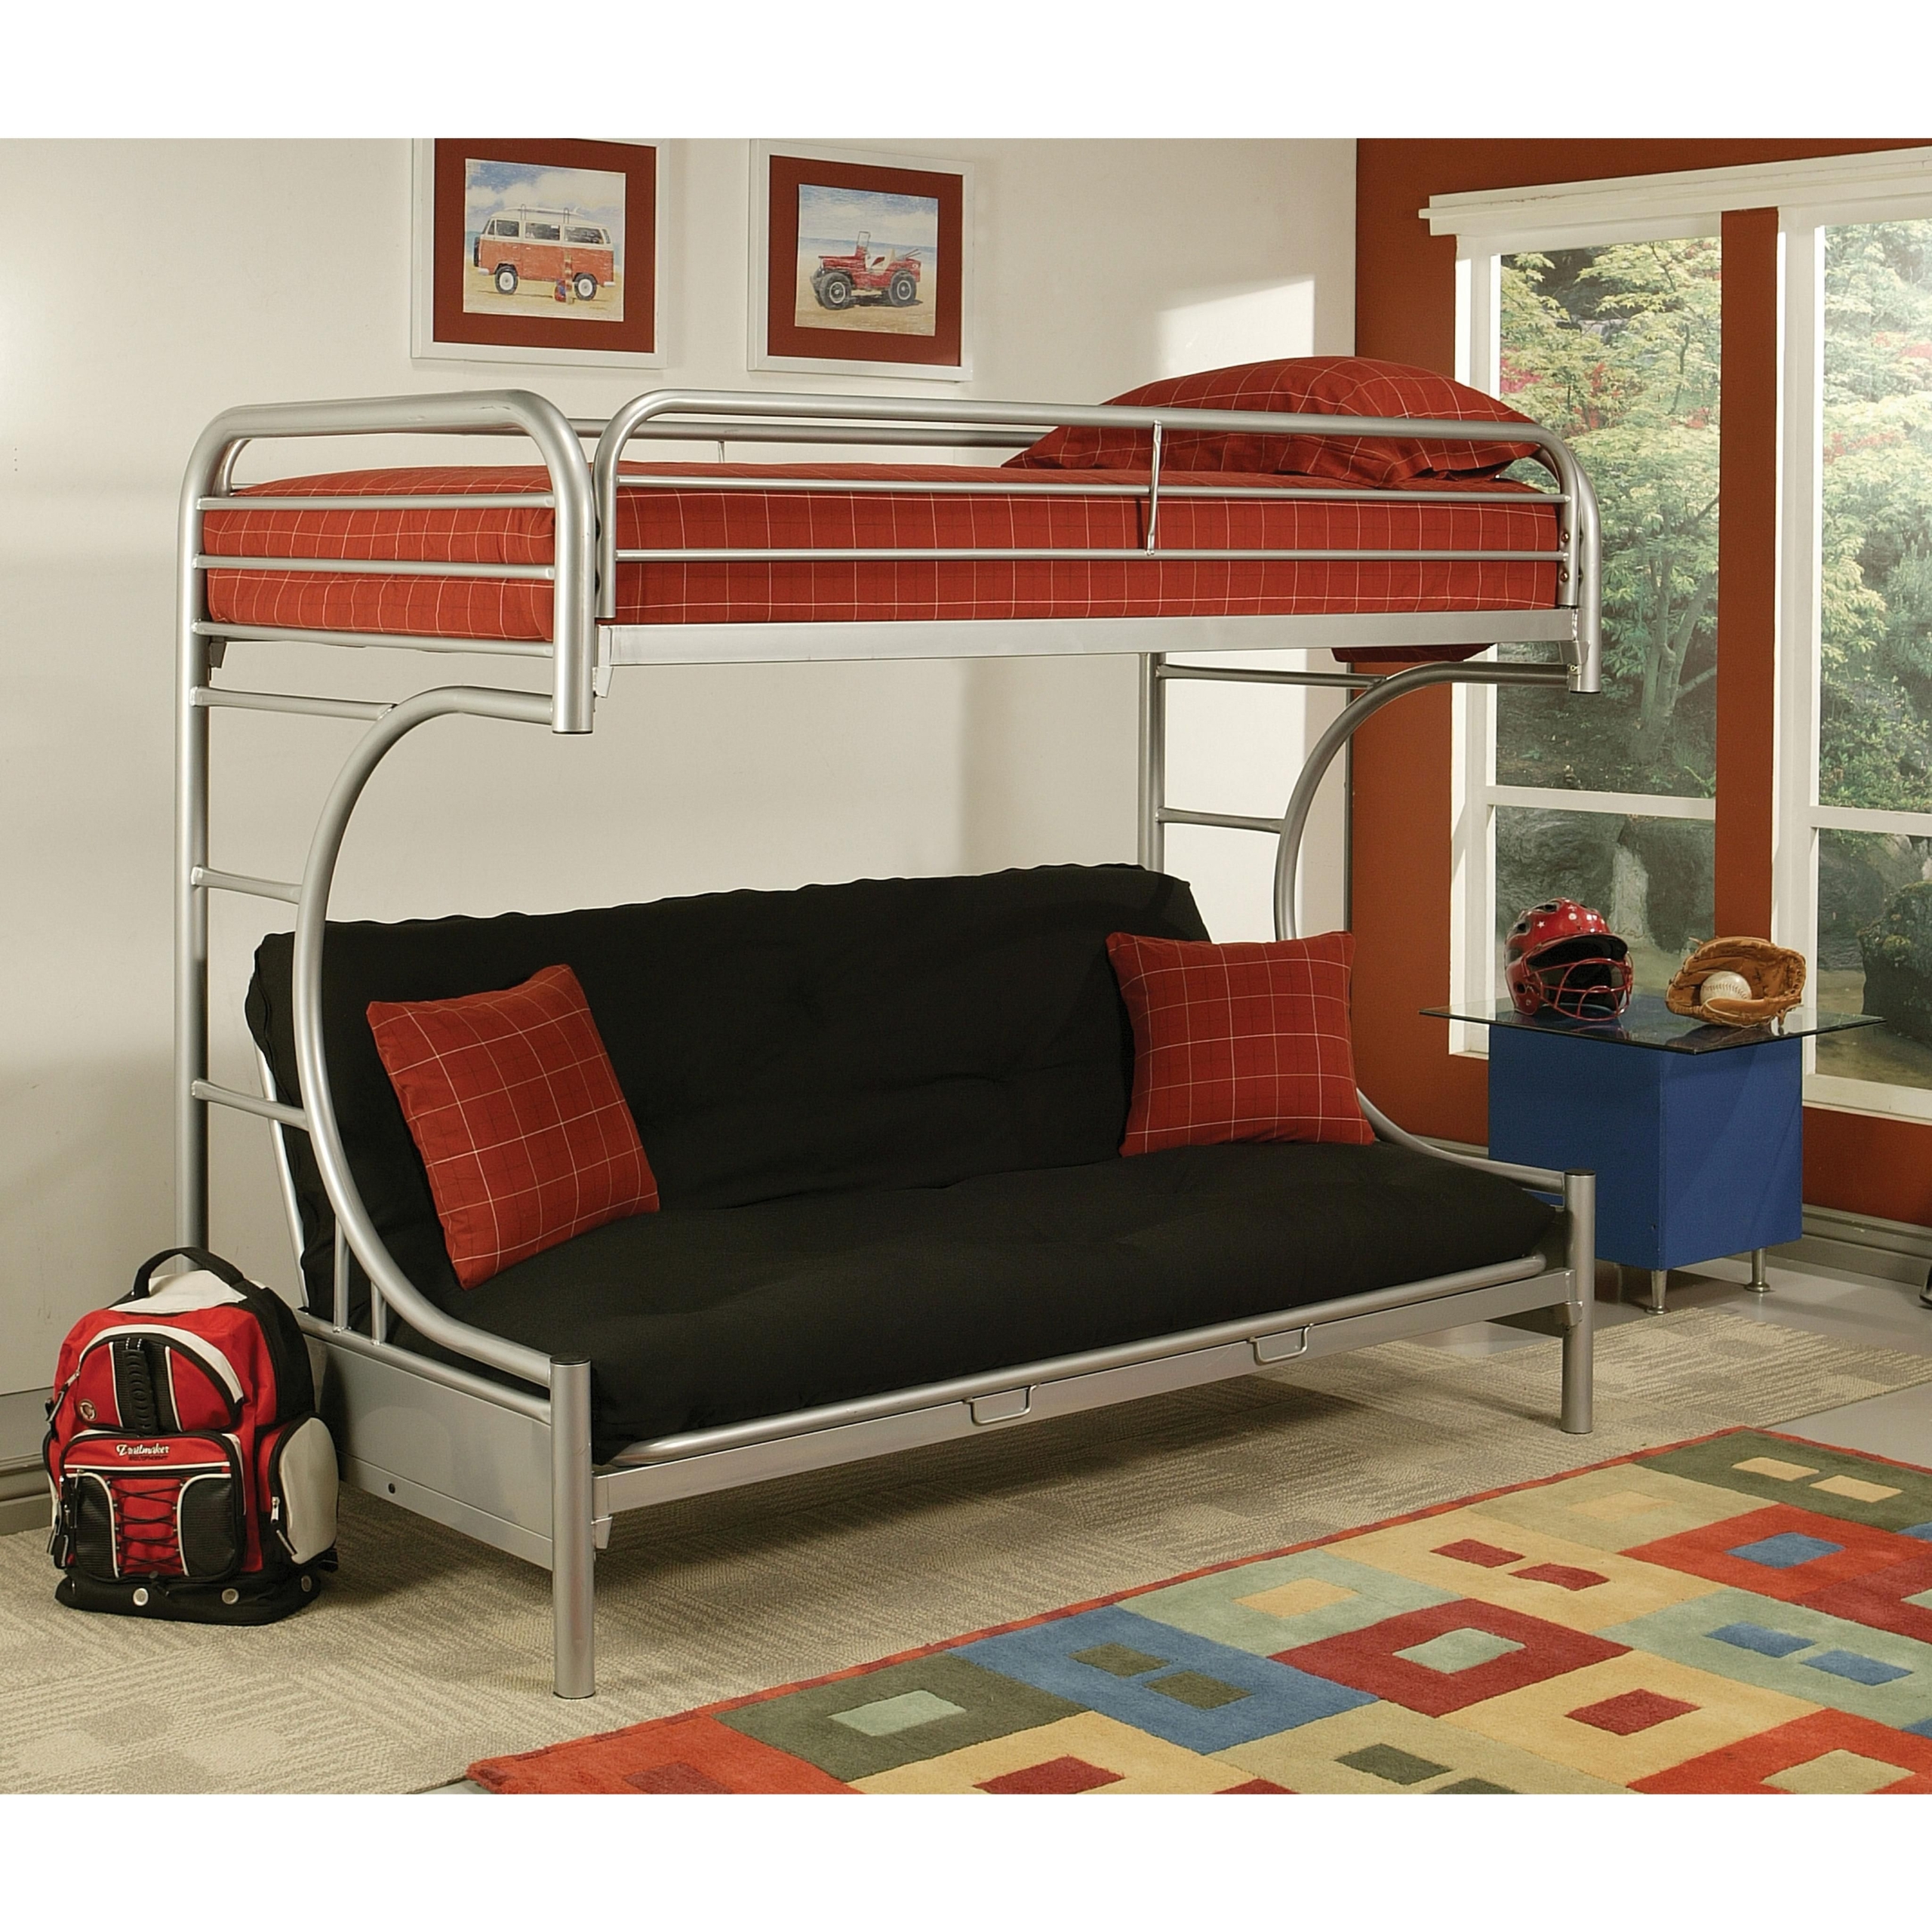 Full Over Futon Bunk Bed Visualhunt, Futon Bunk Bed Couch